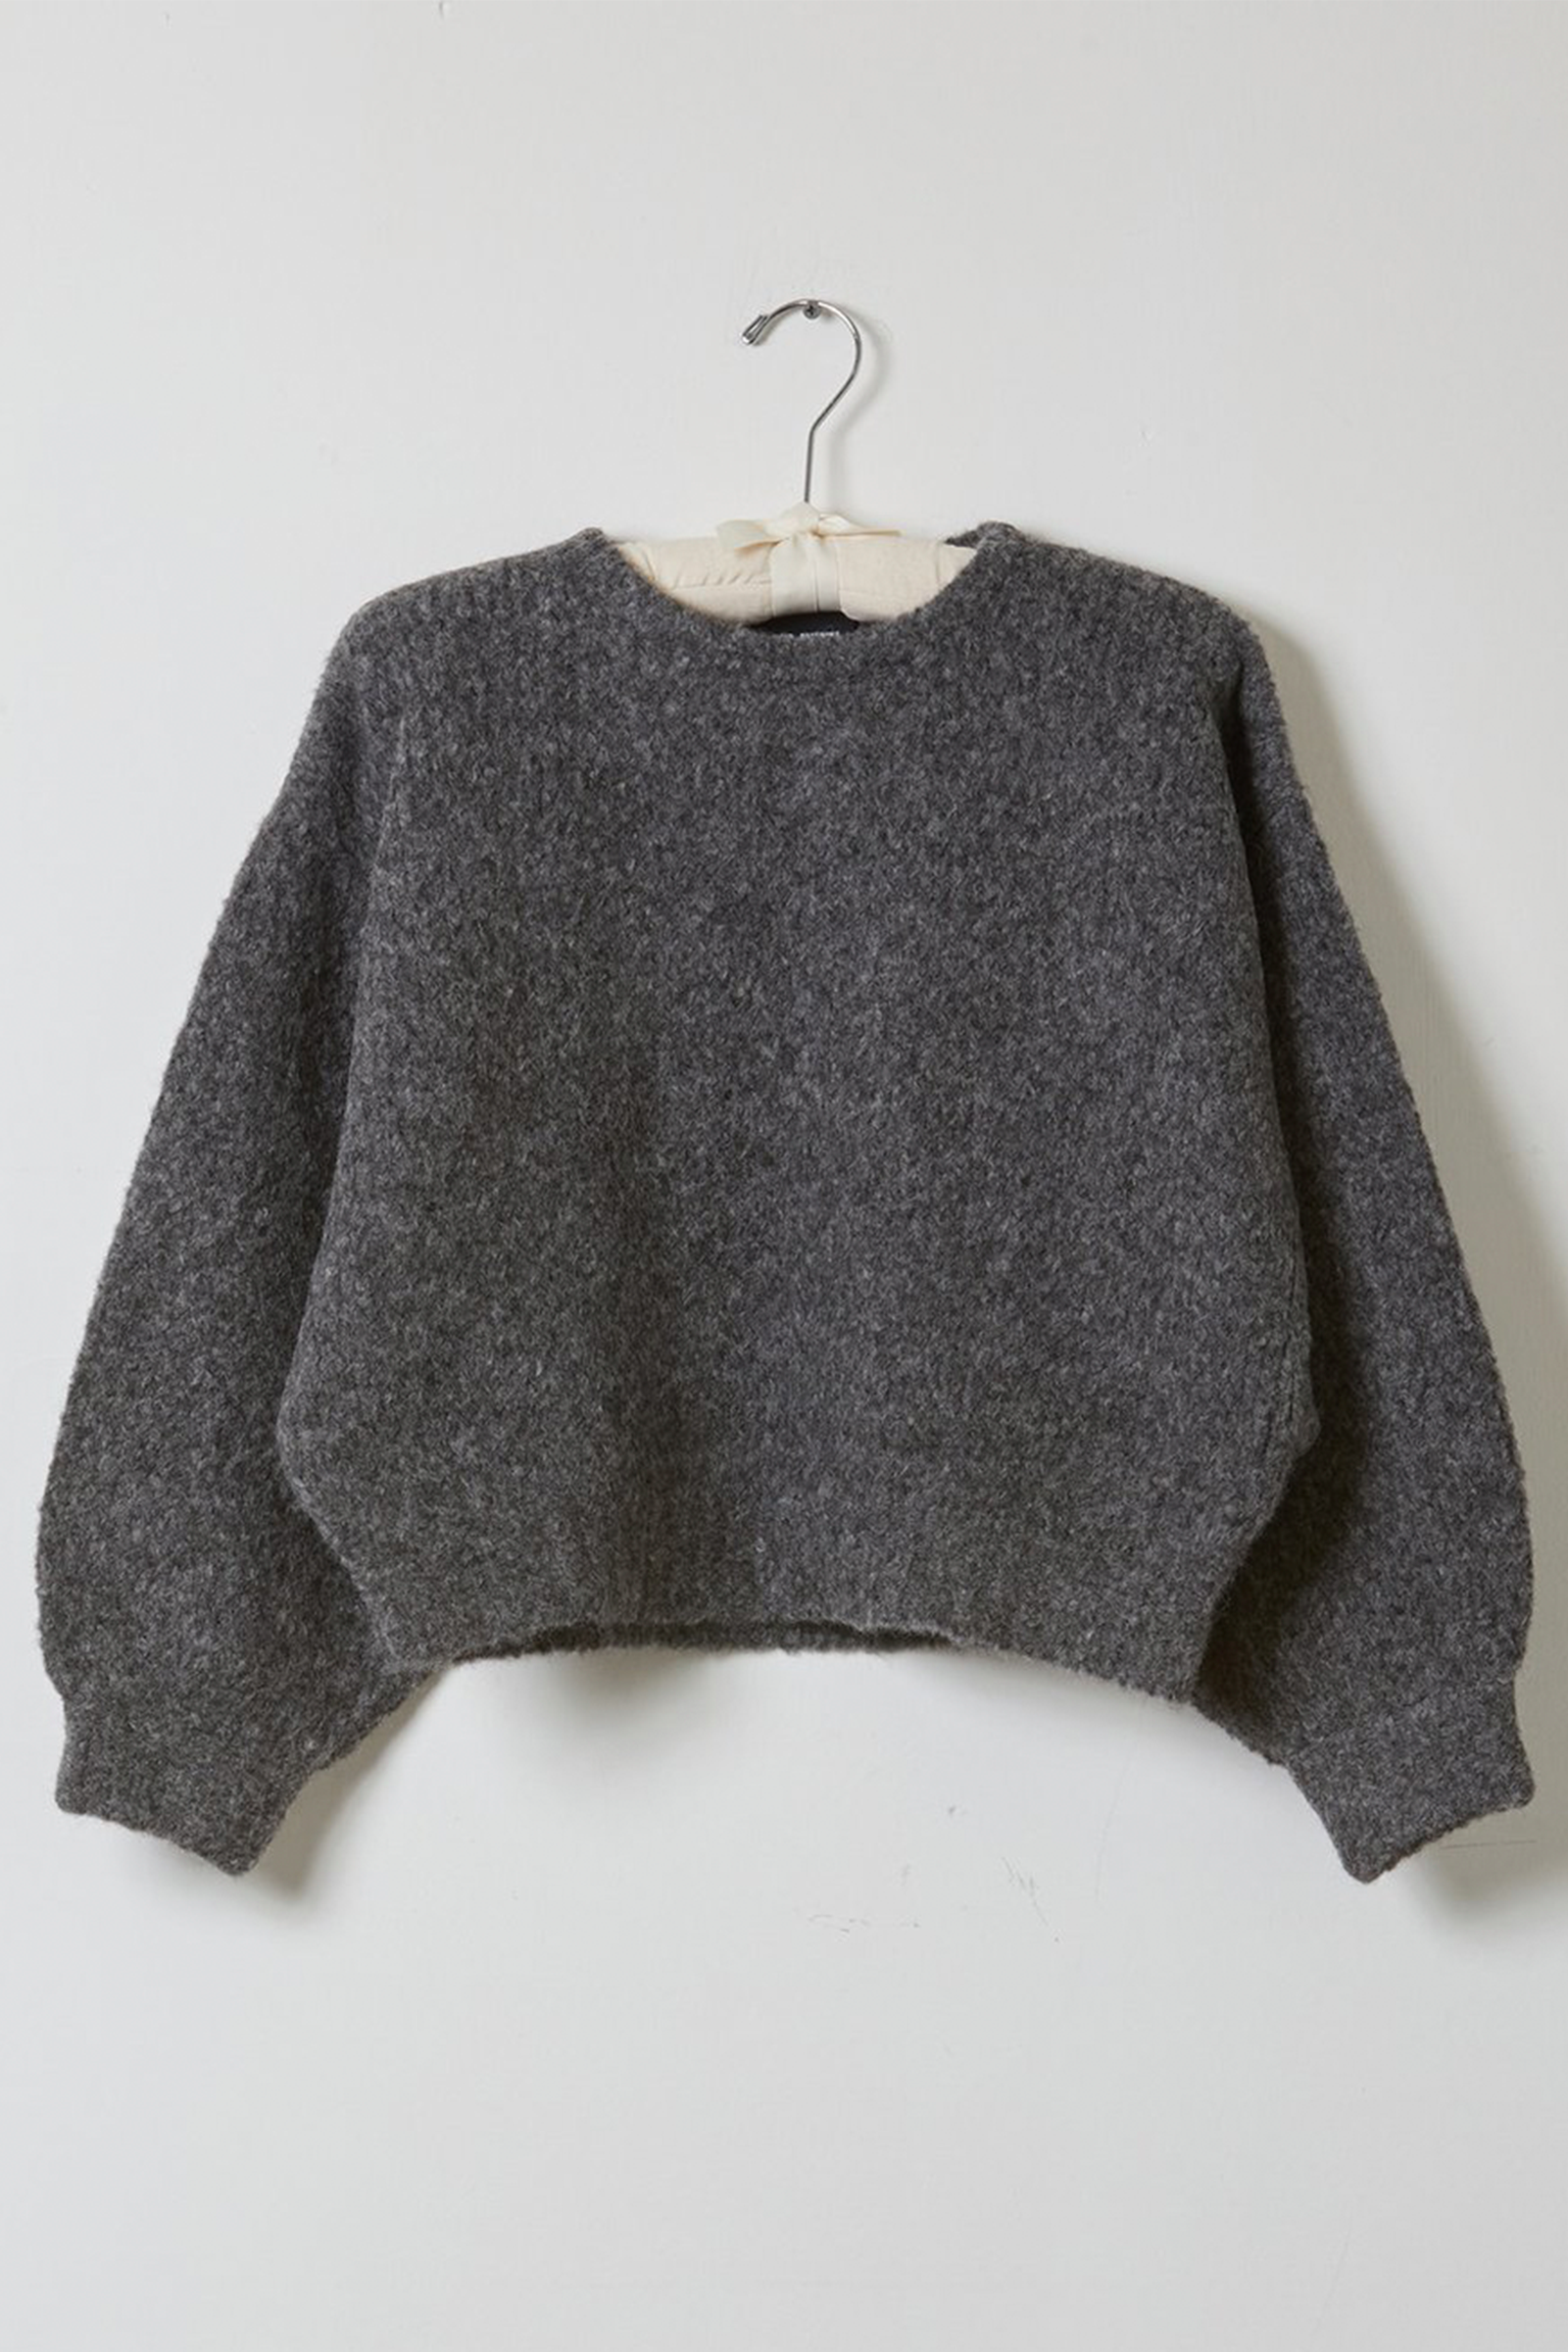 Atelier Delphine Balloon Sleeve Sweater in Charcoal